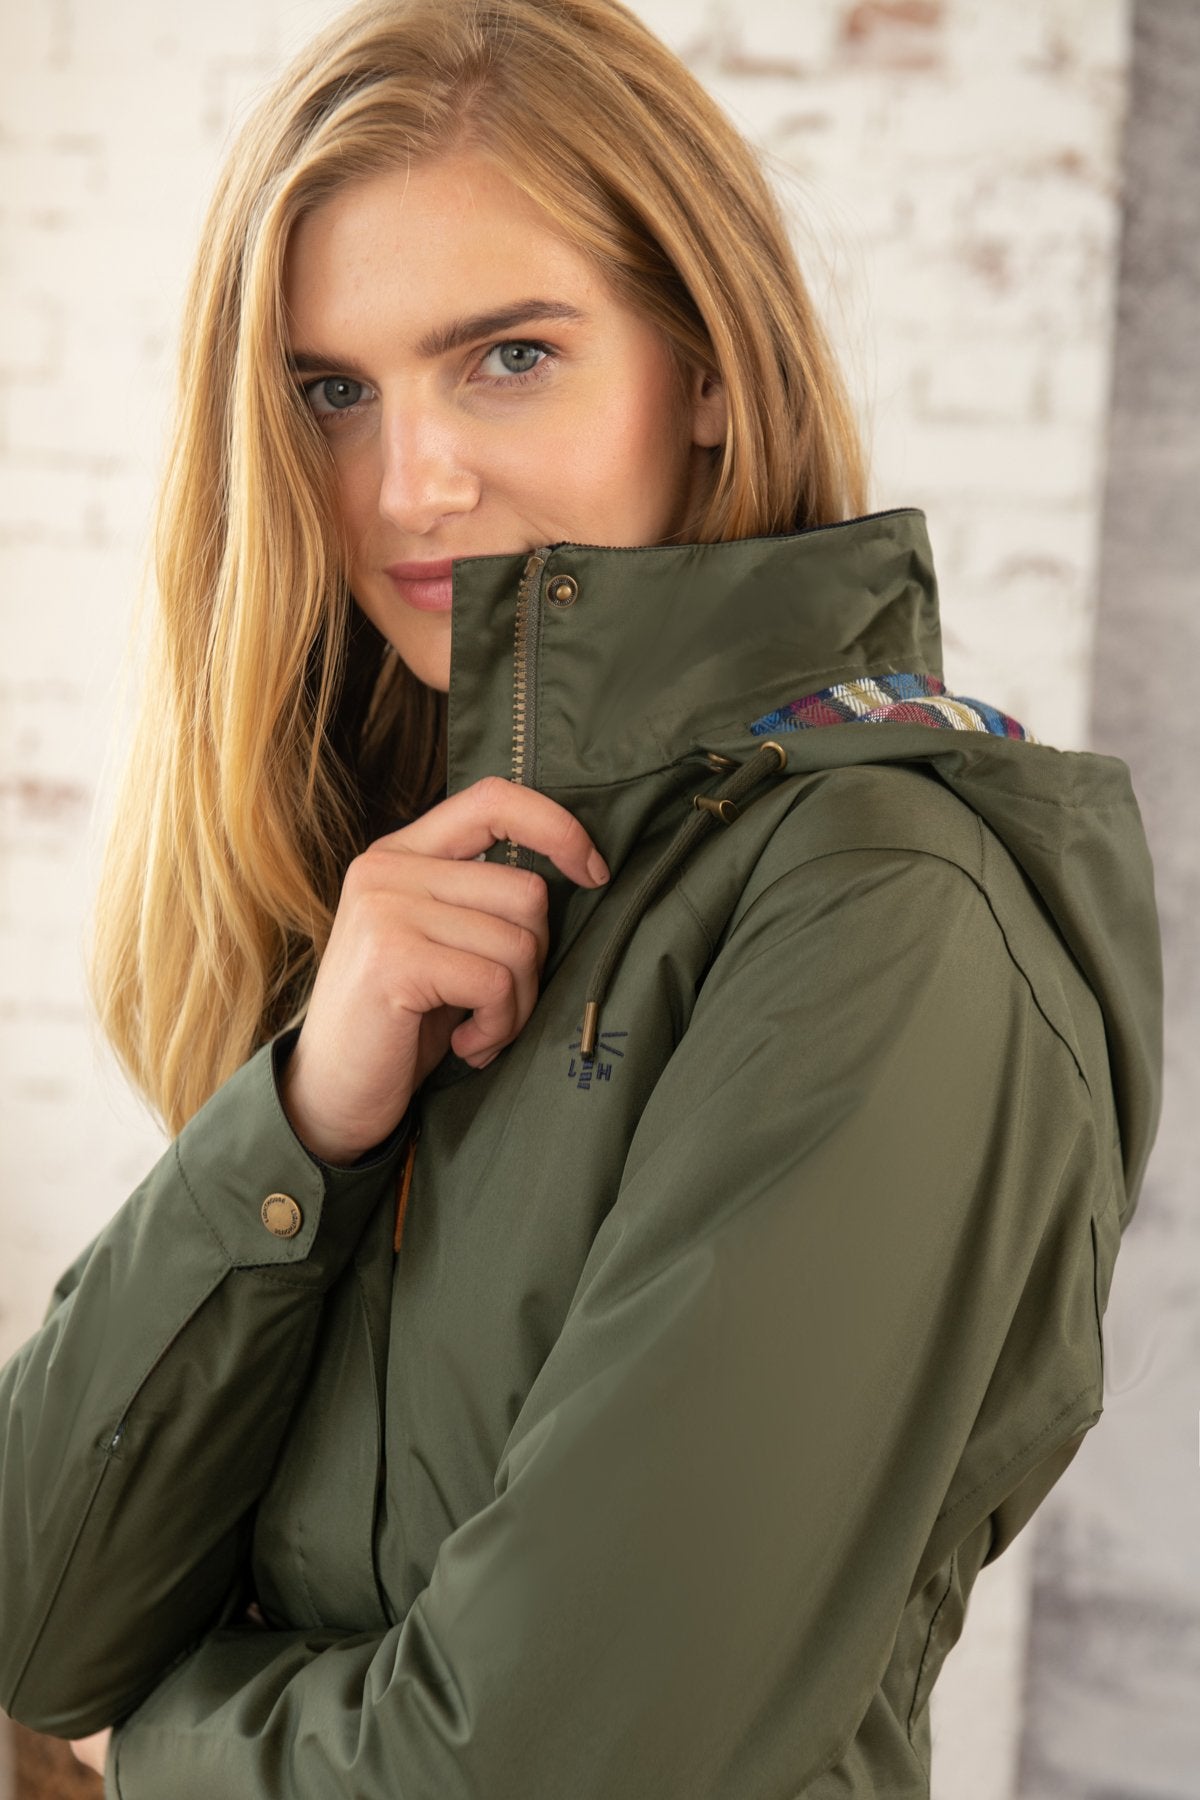 Lighthouse Kendal Waterproof Coat - Forest